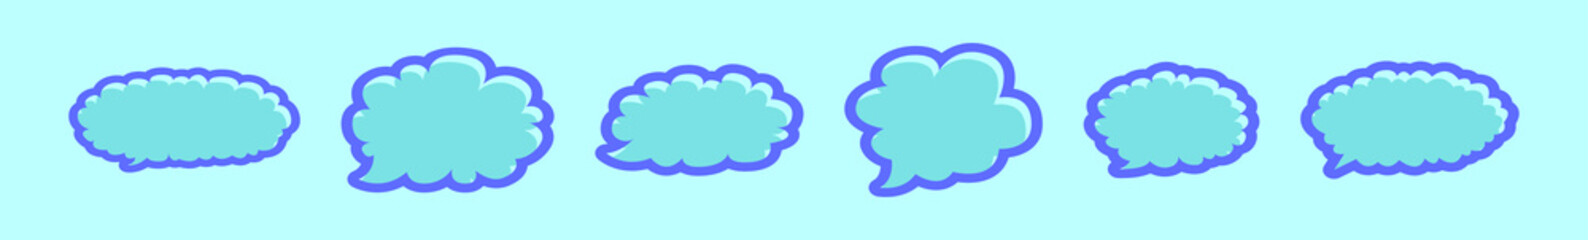 set of speech bubbles cartoon icon design template with various models. vector illustration isolated on blue background